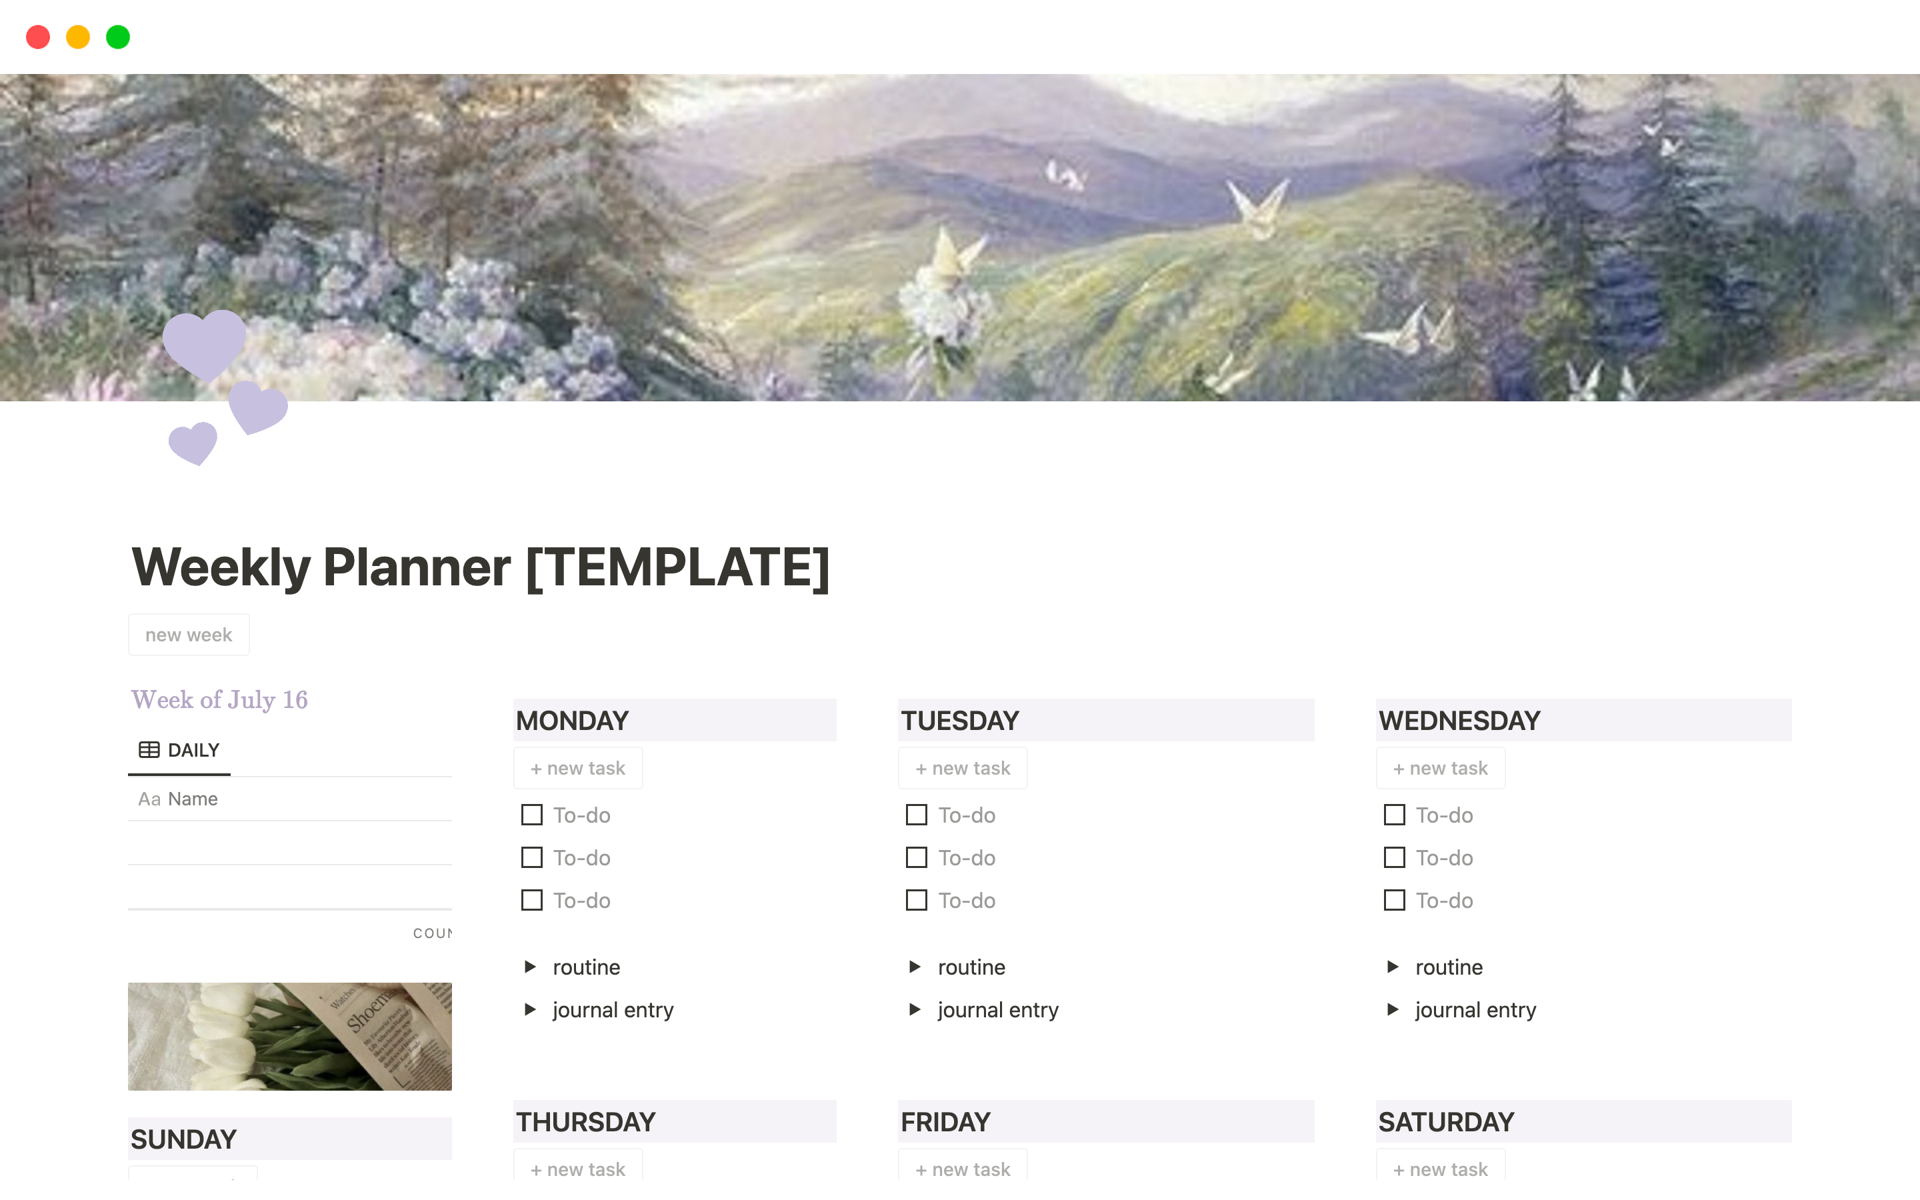 Stay organized and boost your productivity with this Notion Weekly Planner. This seamless and complete tool allows you to create, customize, and manage your weekly schedules effortlessly.